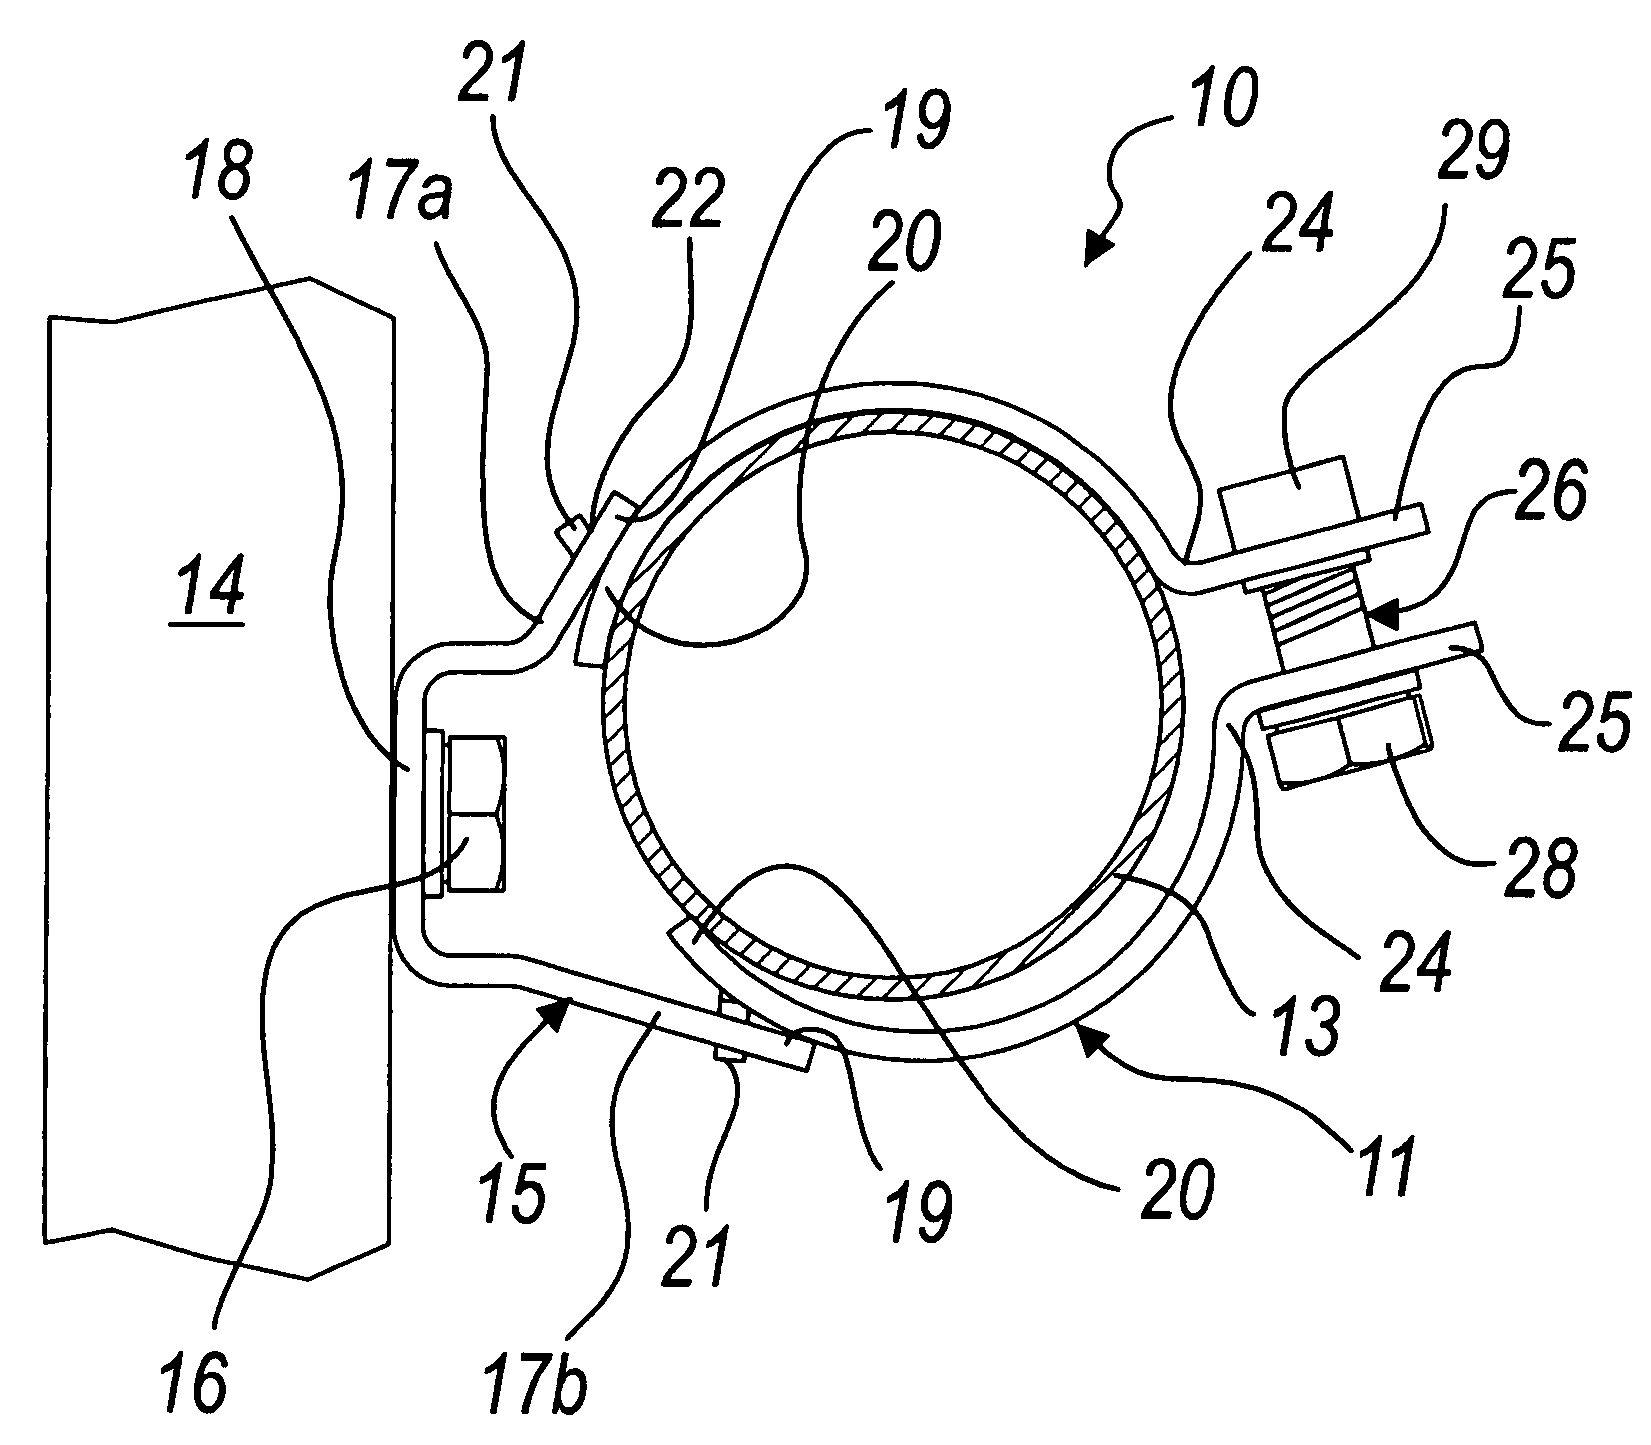 Device for fixing pipes to supporting structures